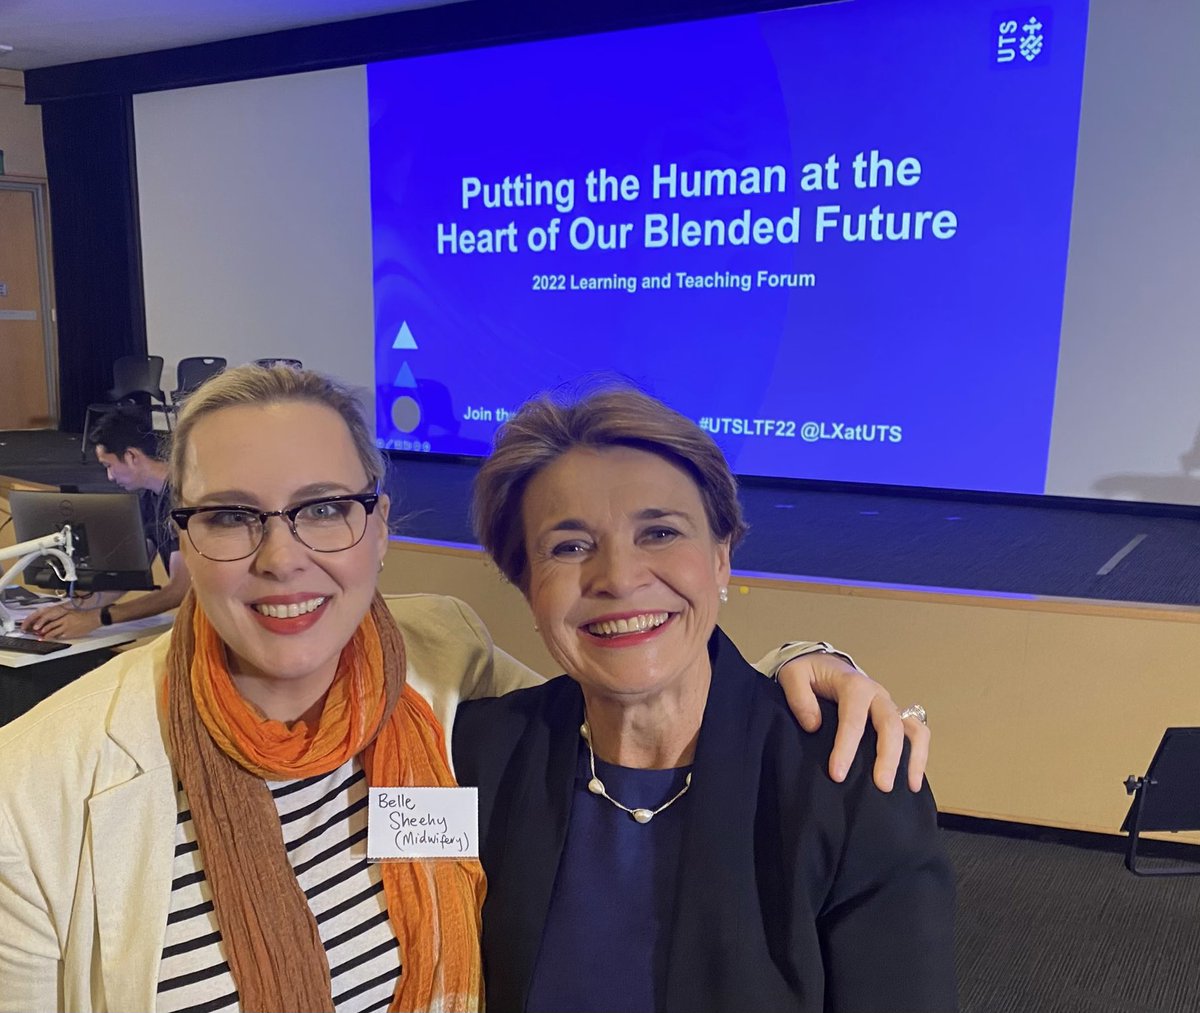 Once upon a time the AMAZING @JoanneEDGray was my Lecturer in Midwifery and the Program Director of the UTS BMid - so looking forward to today’s 2022 UTS LnT Forum #UTSLTF22 @LXatUTS @utsSoNM @UTS_Health